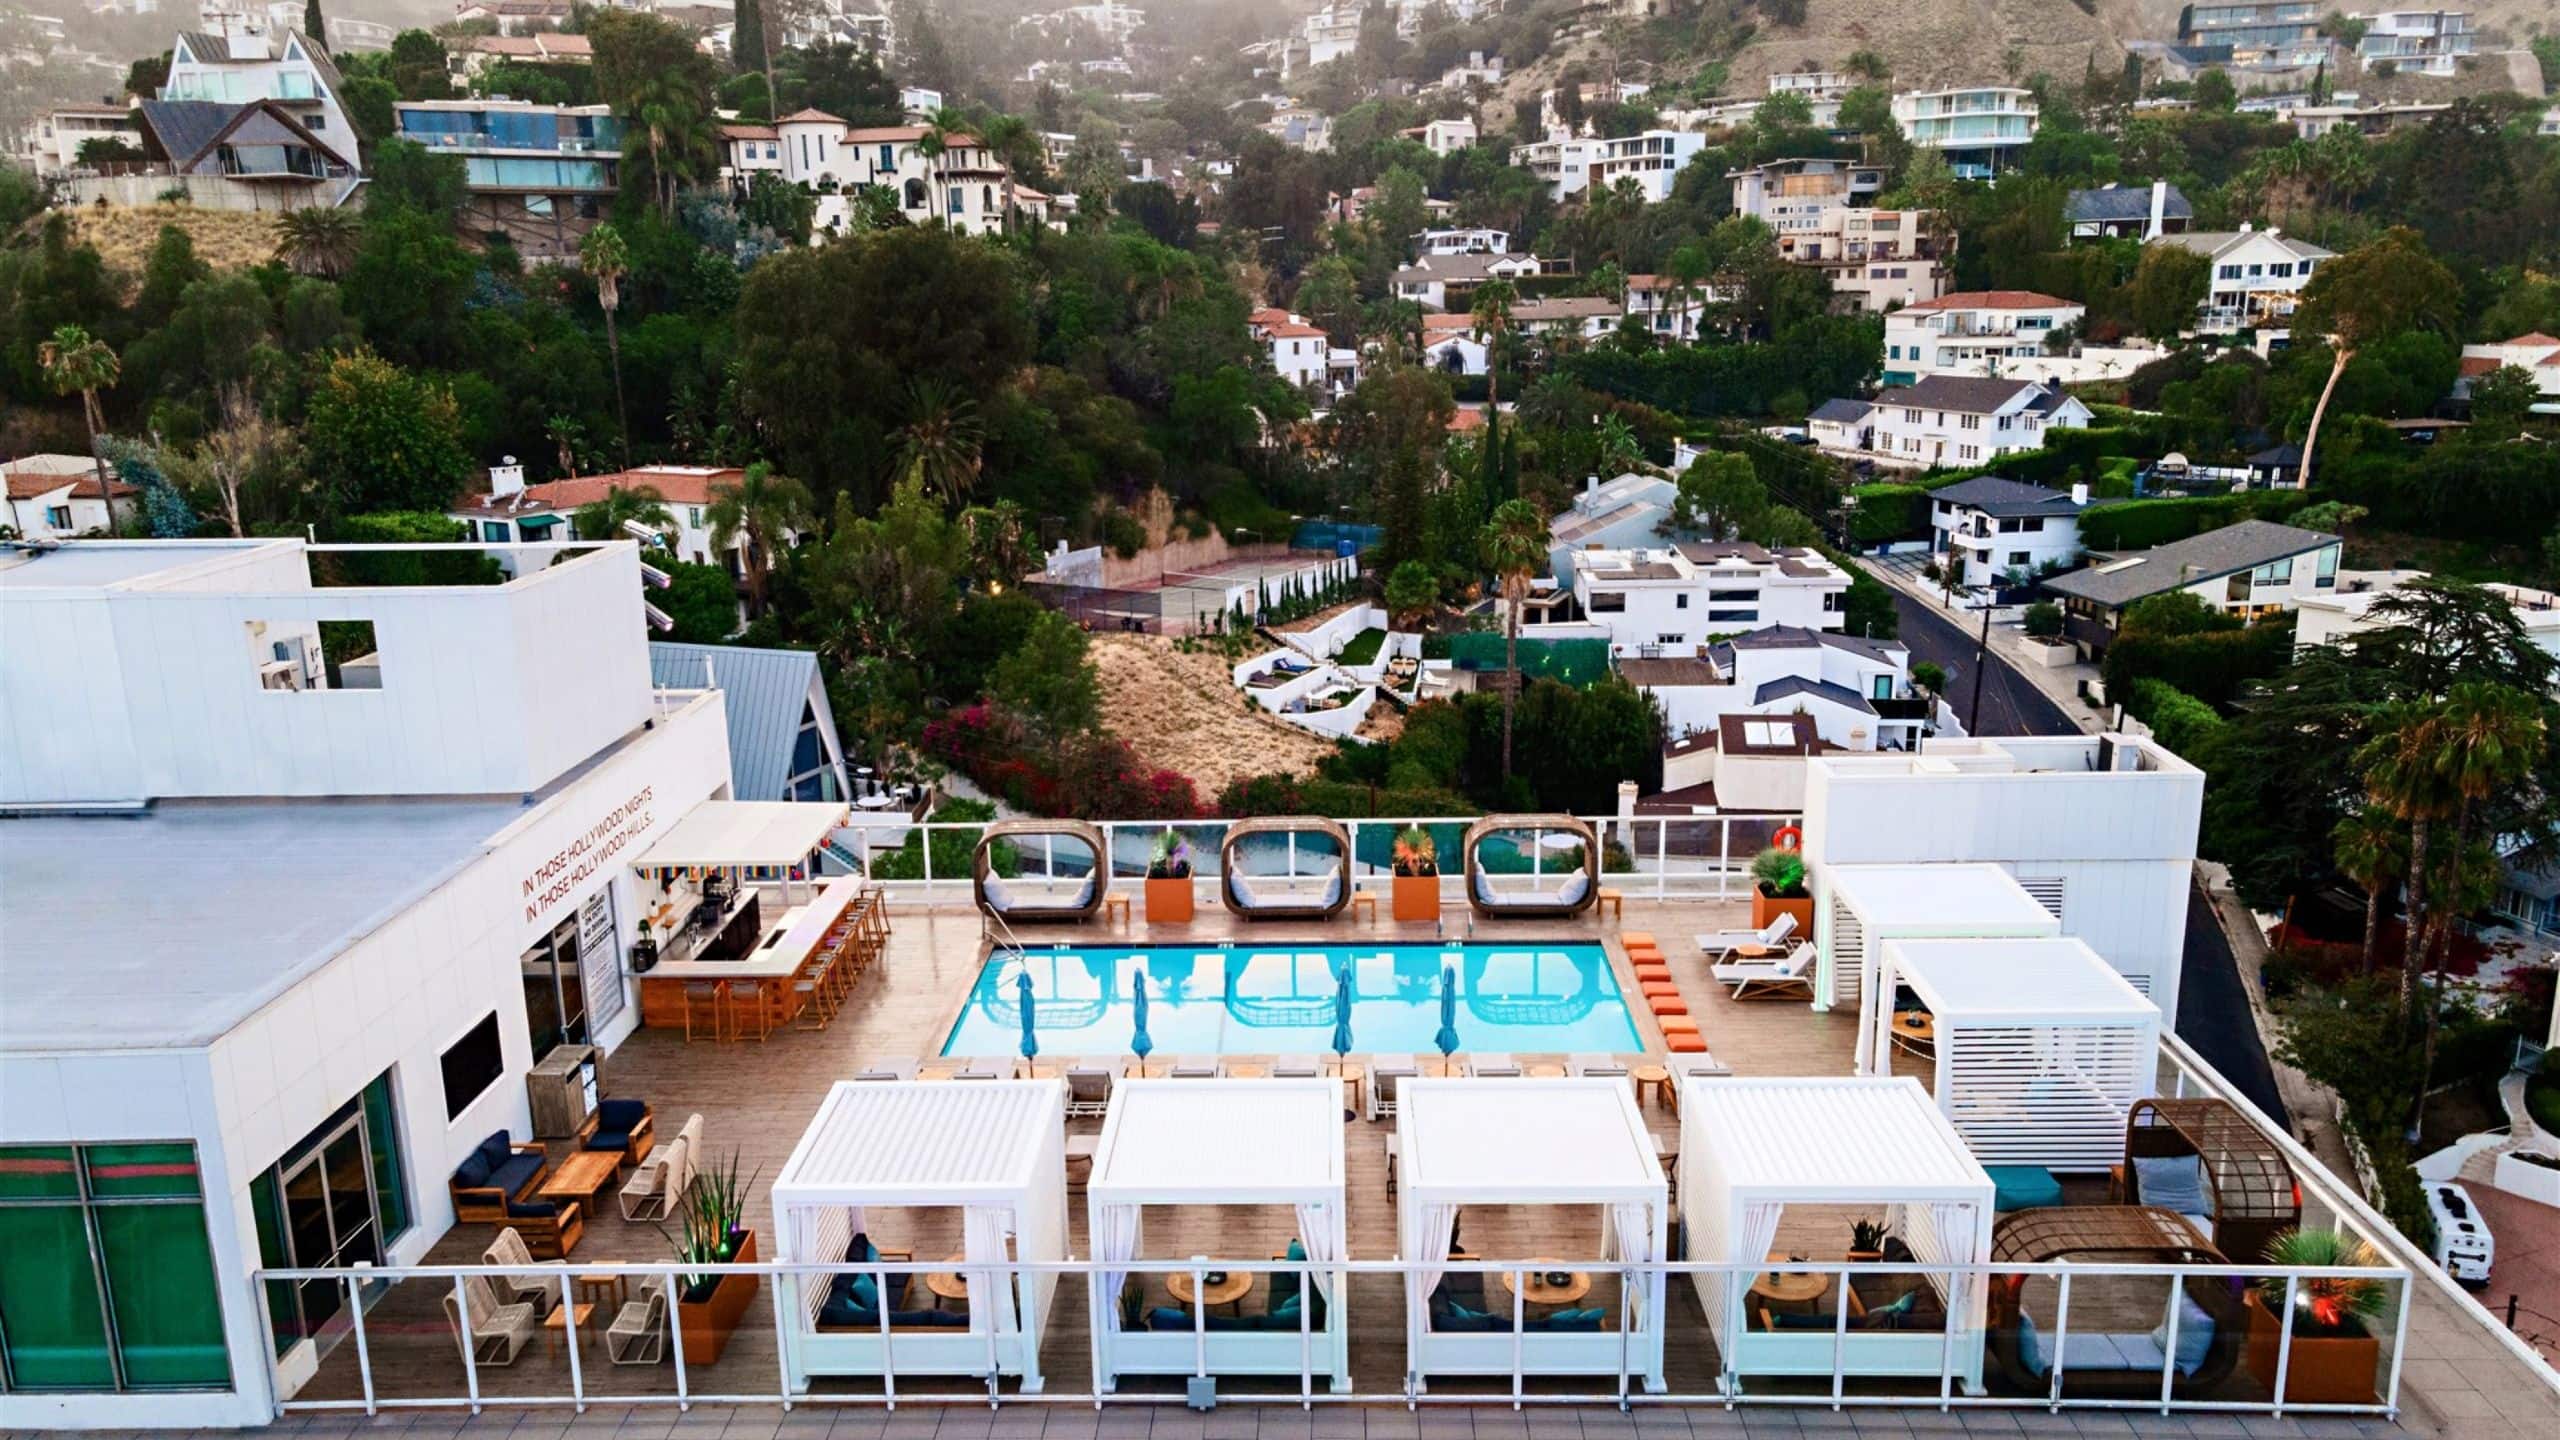 Andaz West Hollywood Rooftop Pool Deck Aerial View